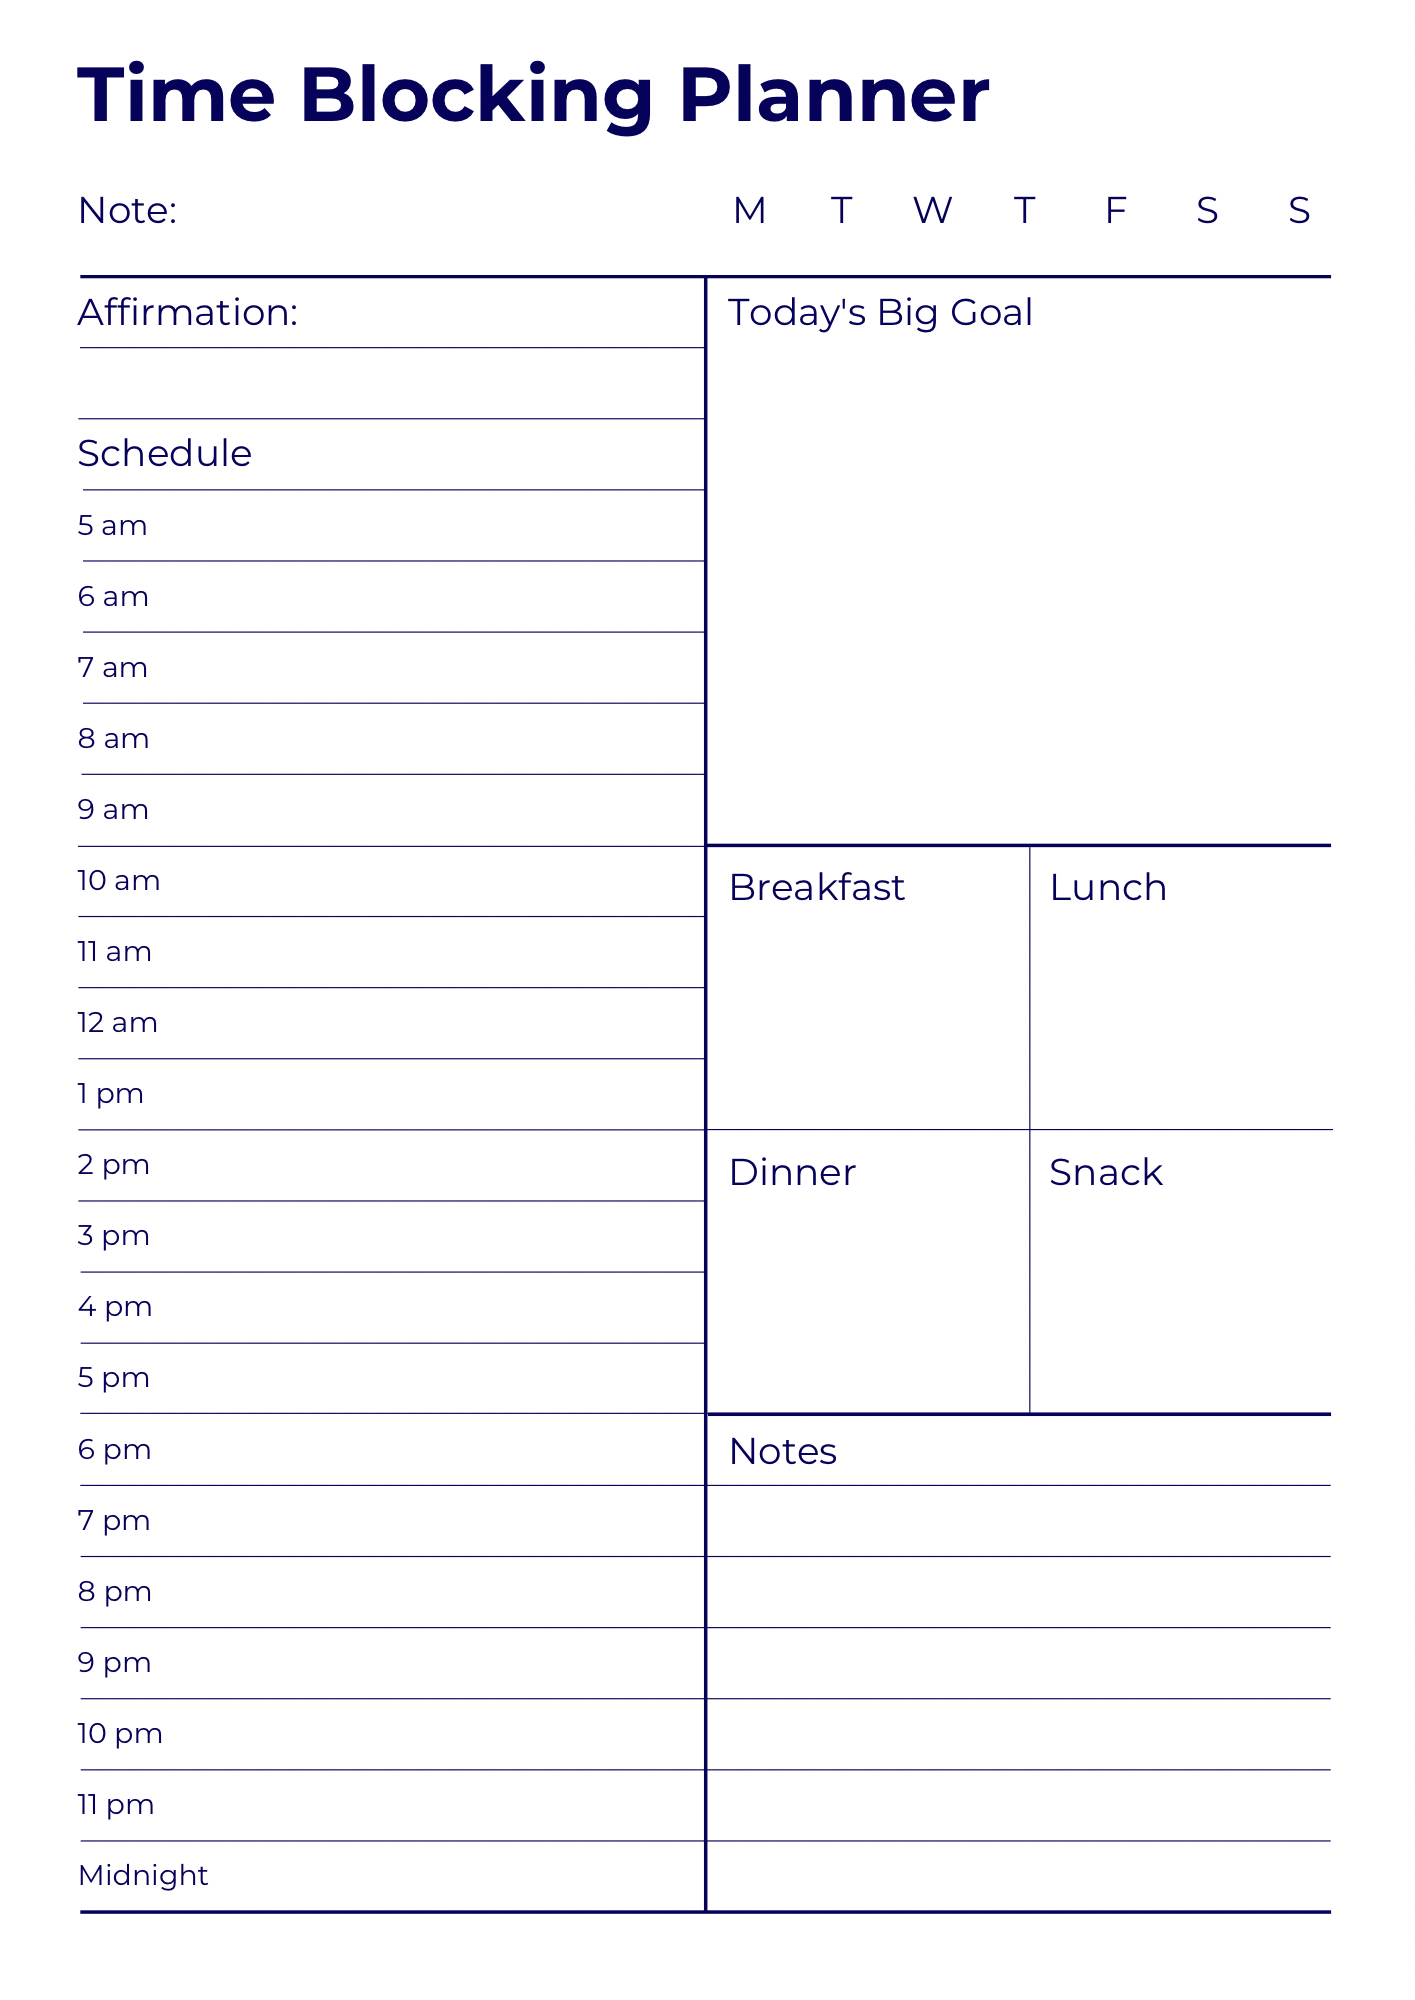 Detailed view of the Time Blocking Daily Planner’s durable design and helpful time management guides.